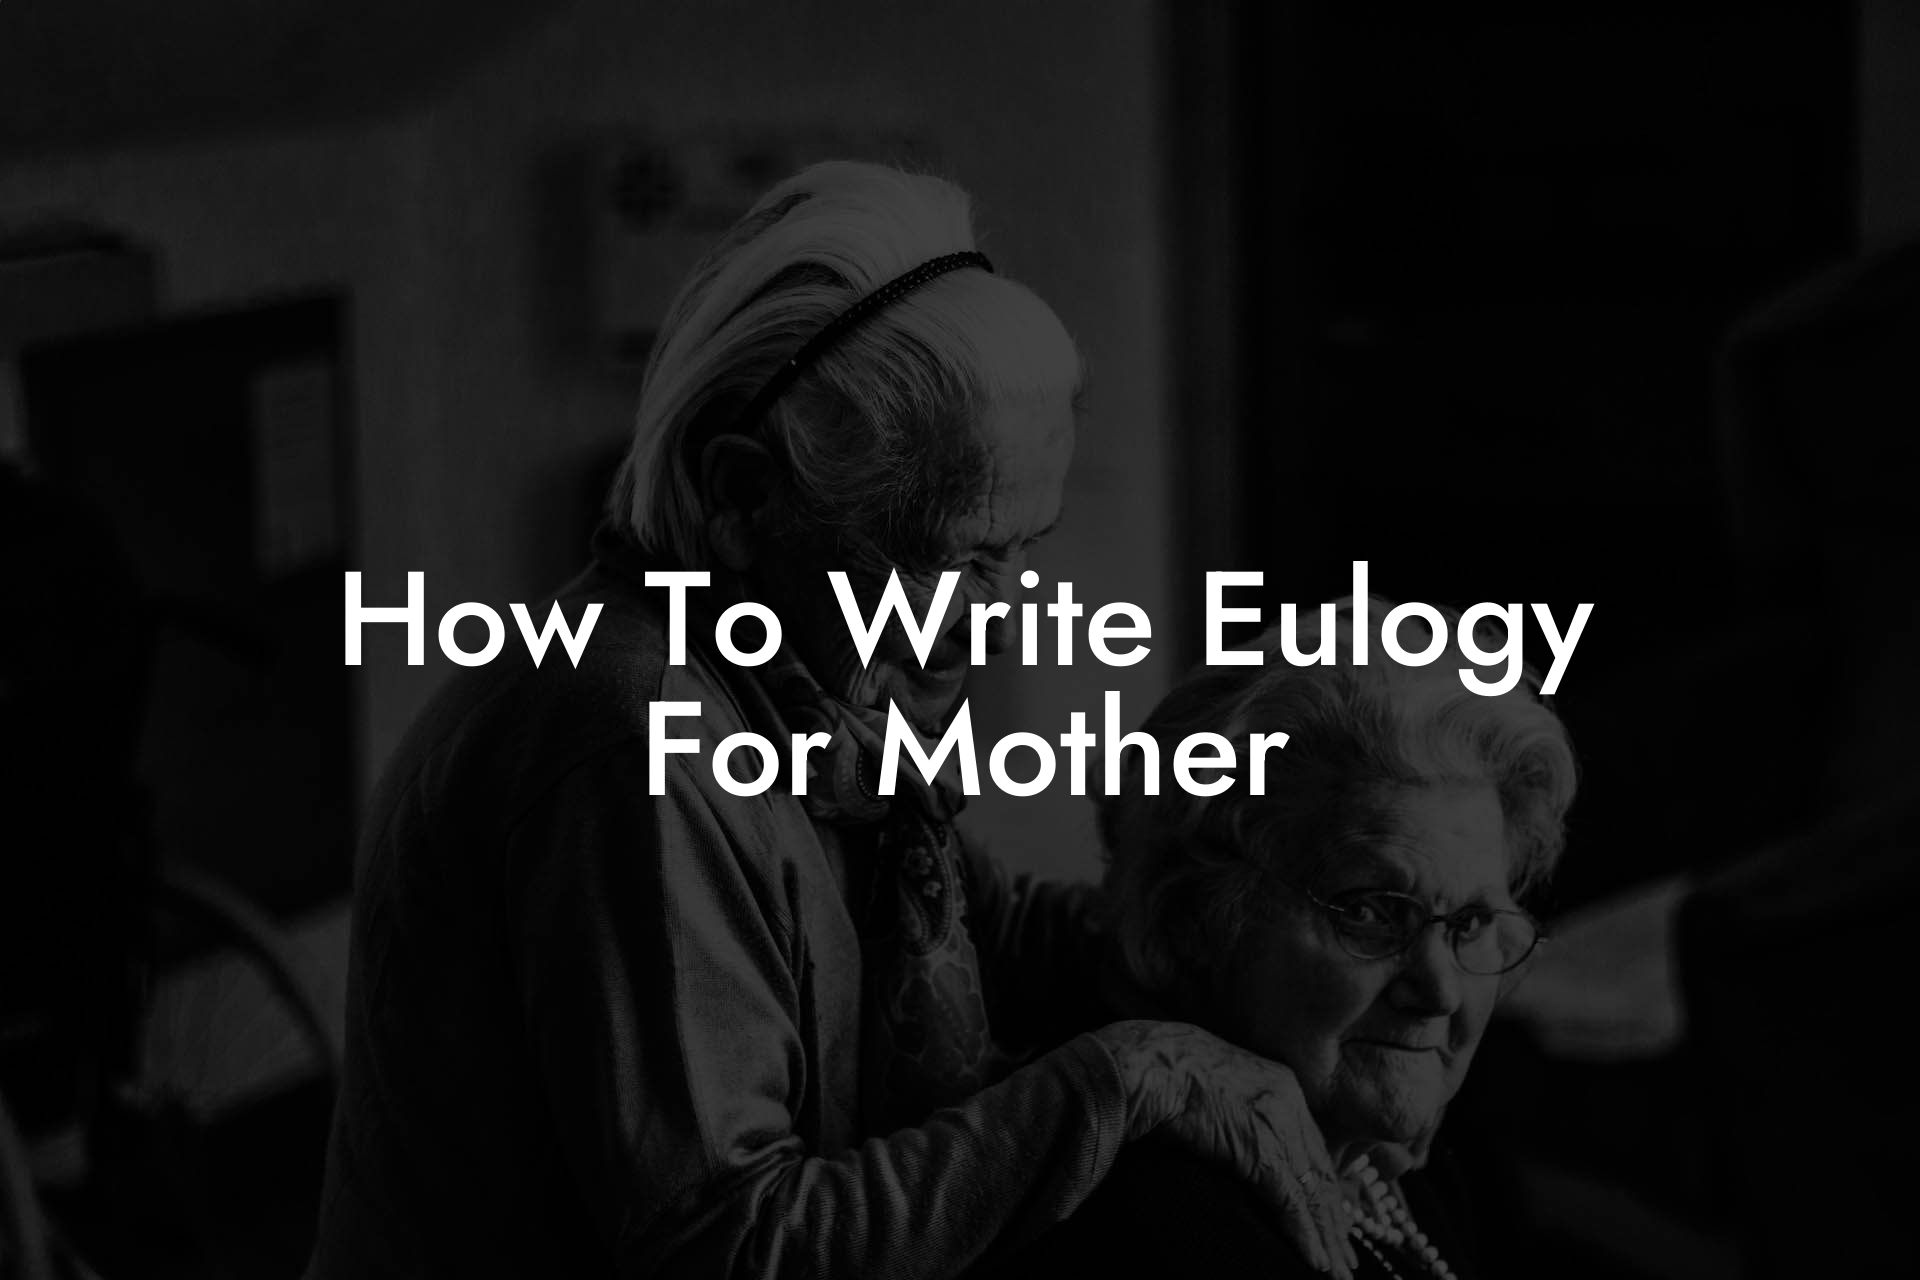 How To Write Eulogy For Mother